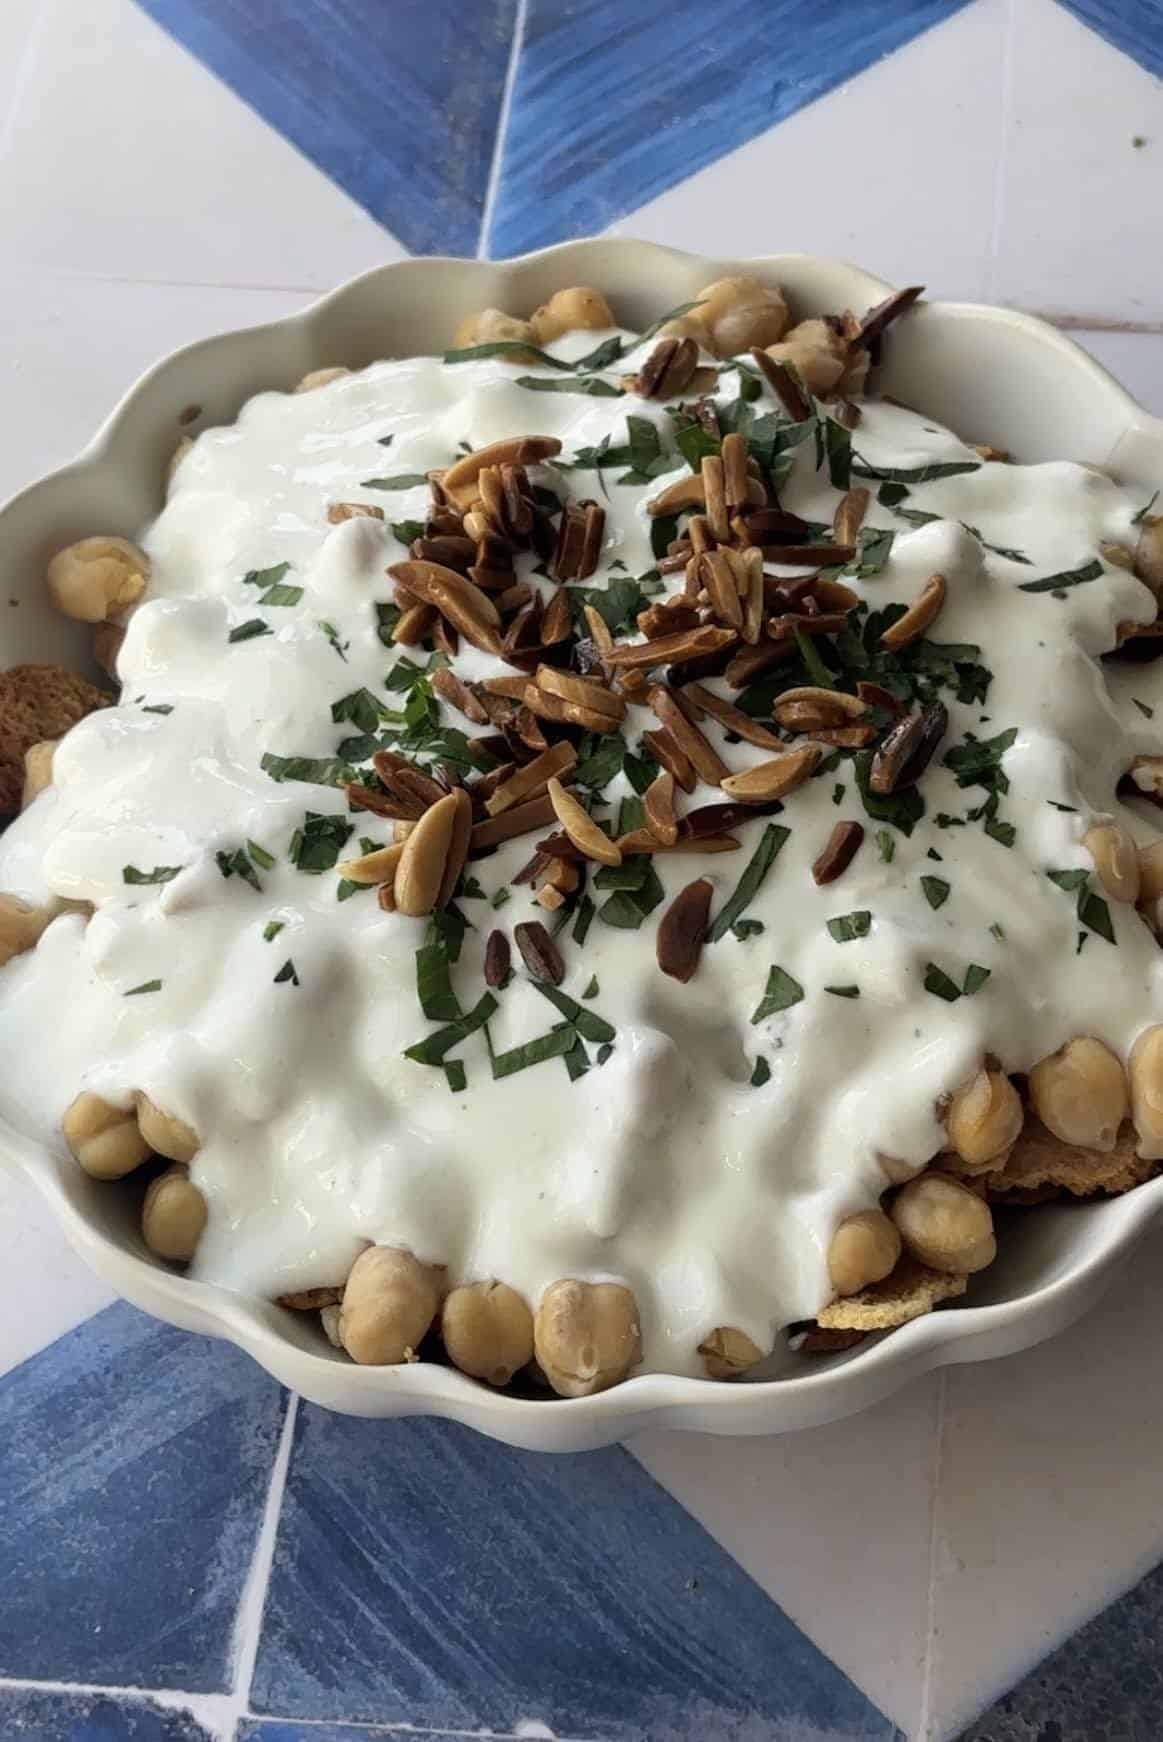 fatteh dish made with crispy pita, spiced chickpeas, creamy yogurt sauce and topped with slivered pine nuts and fresh parsley